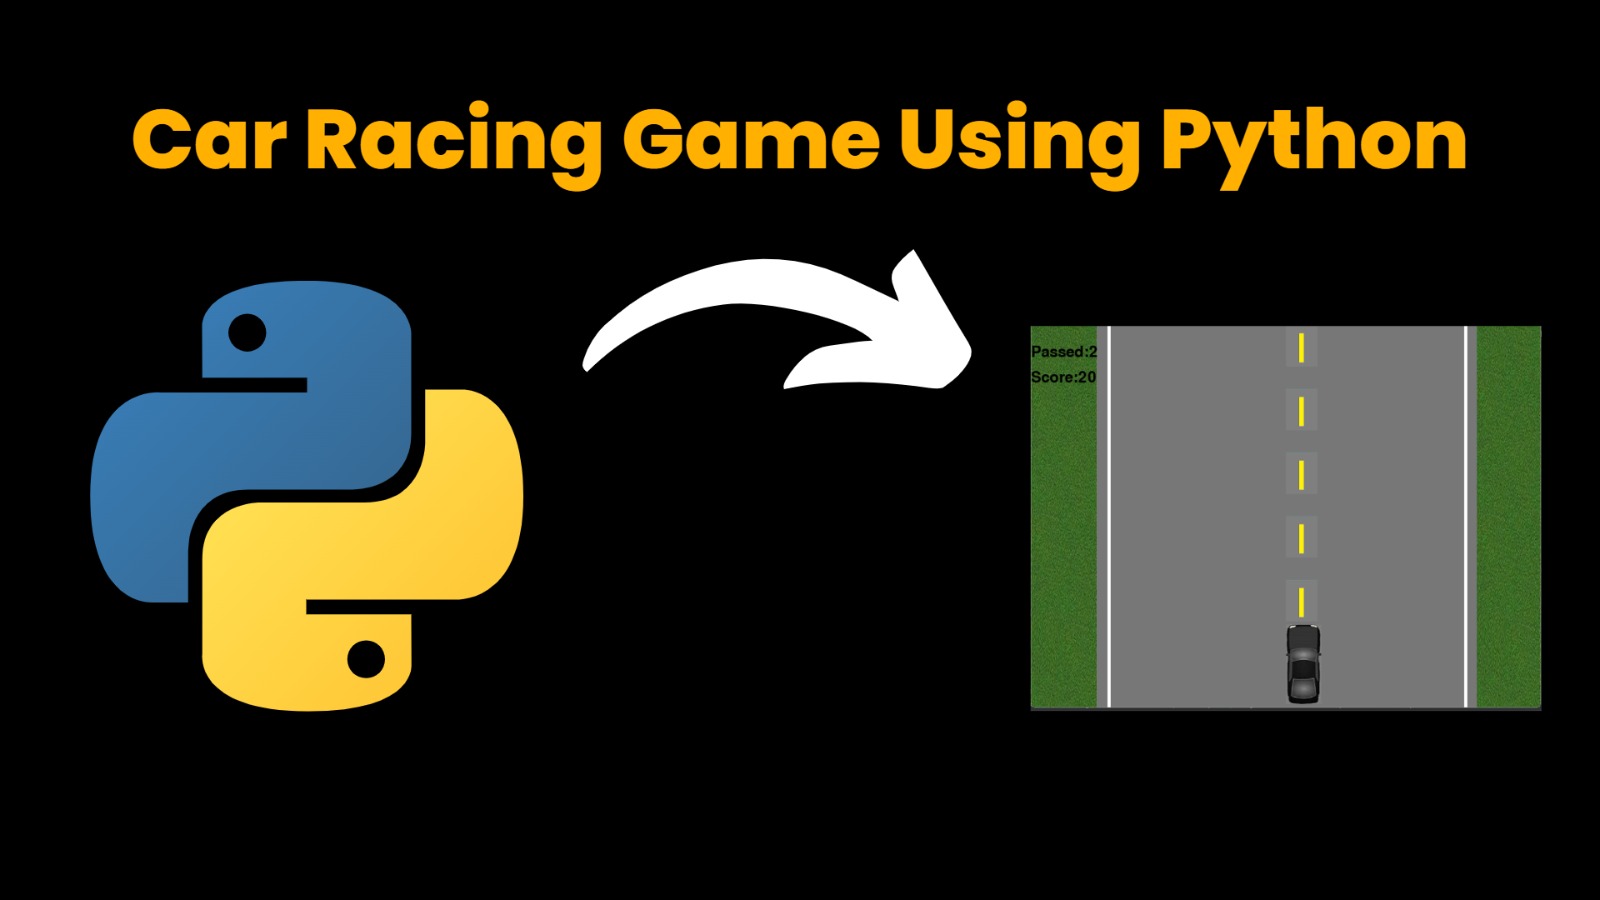 Making A Game With Python 